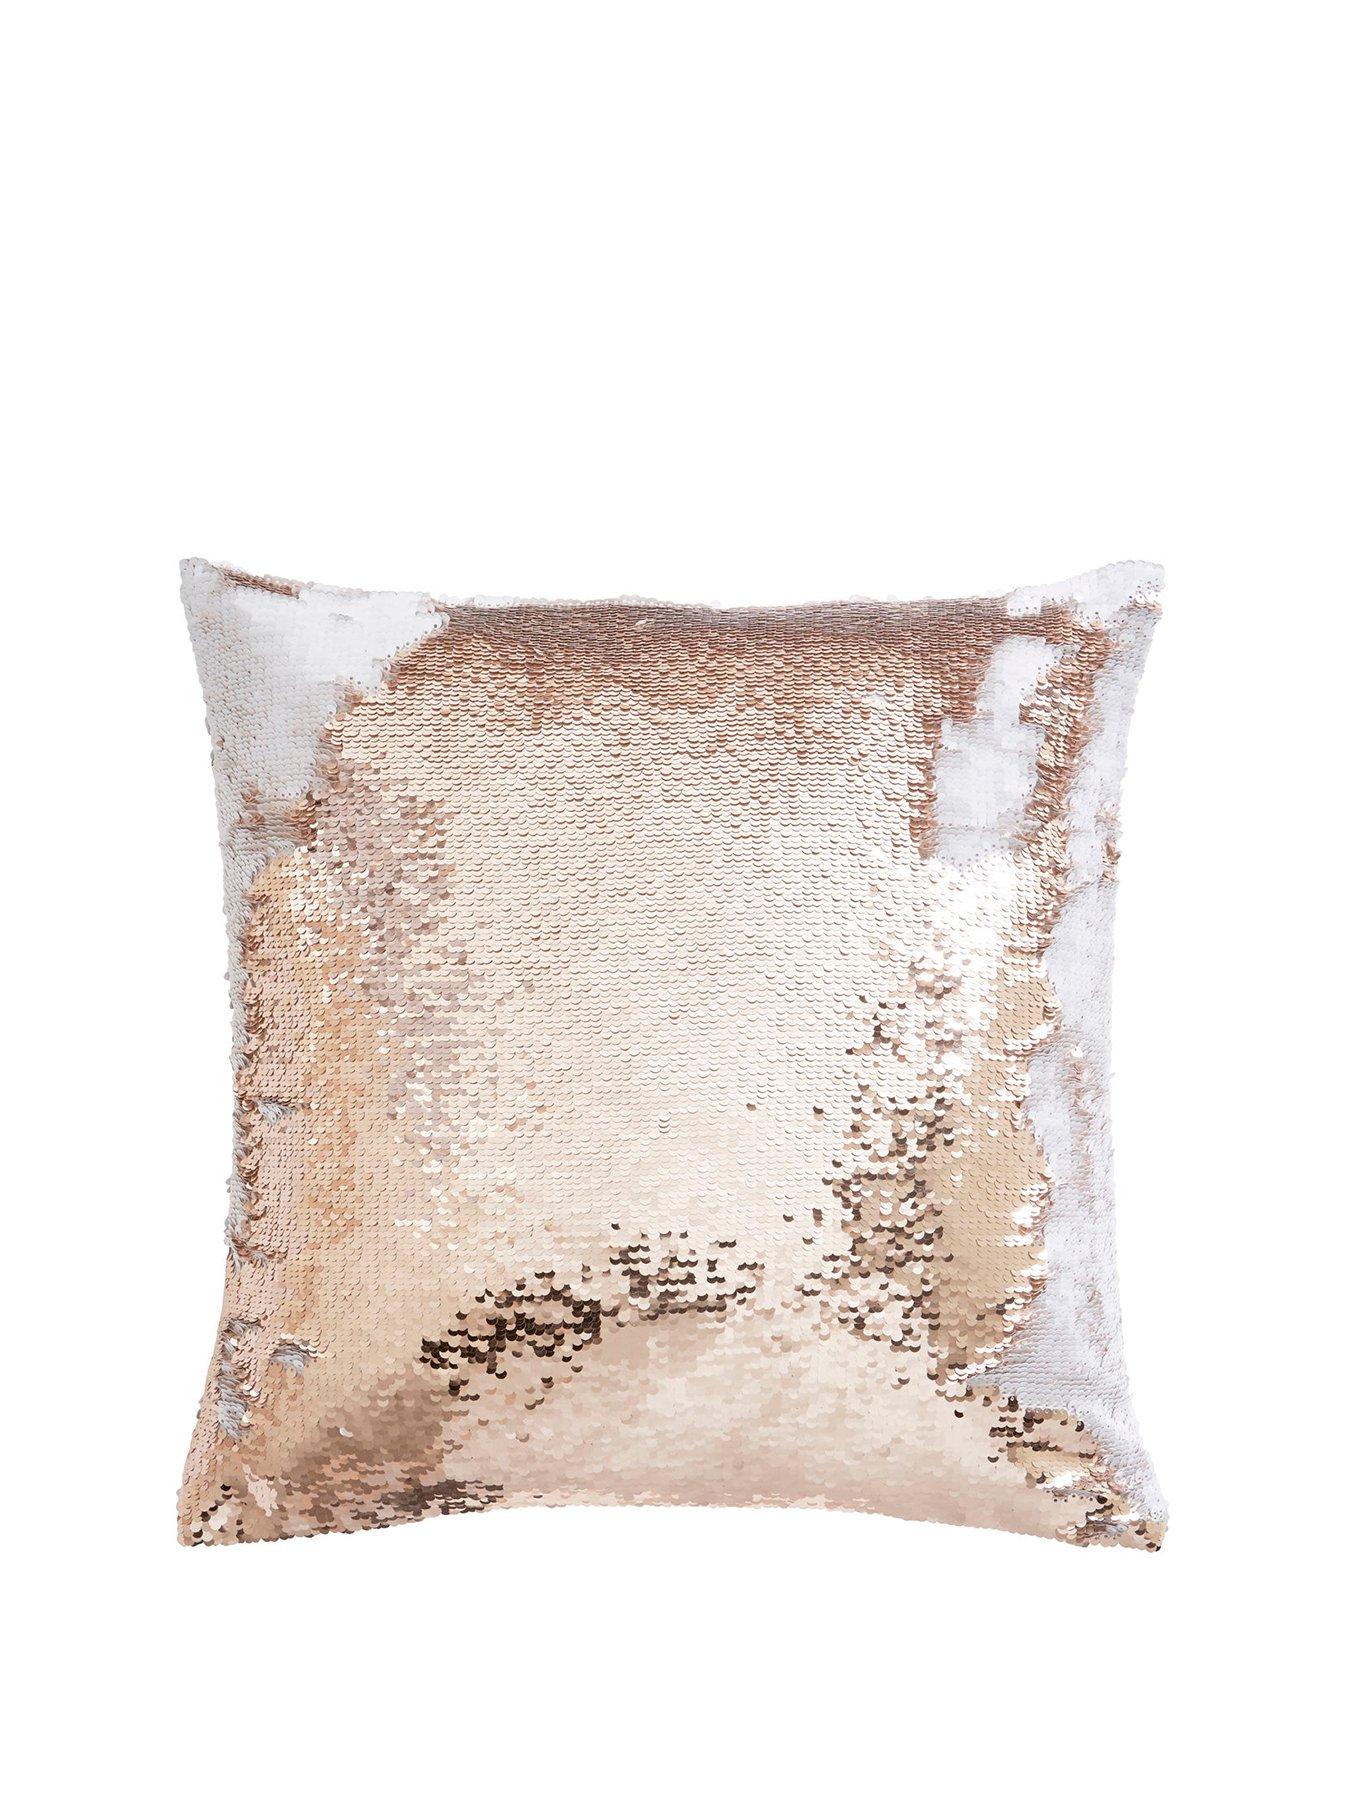 Tess Daly Sequin Rose Gold Cushion | very.co.uk